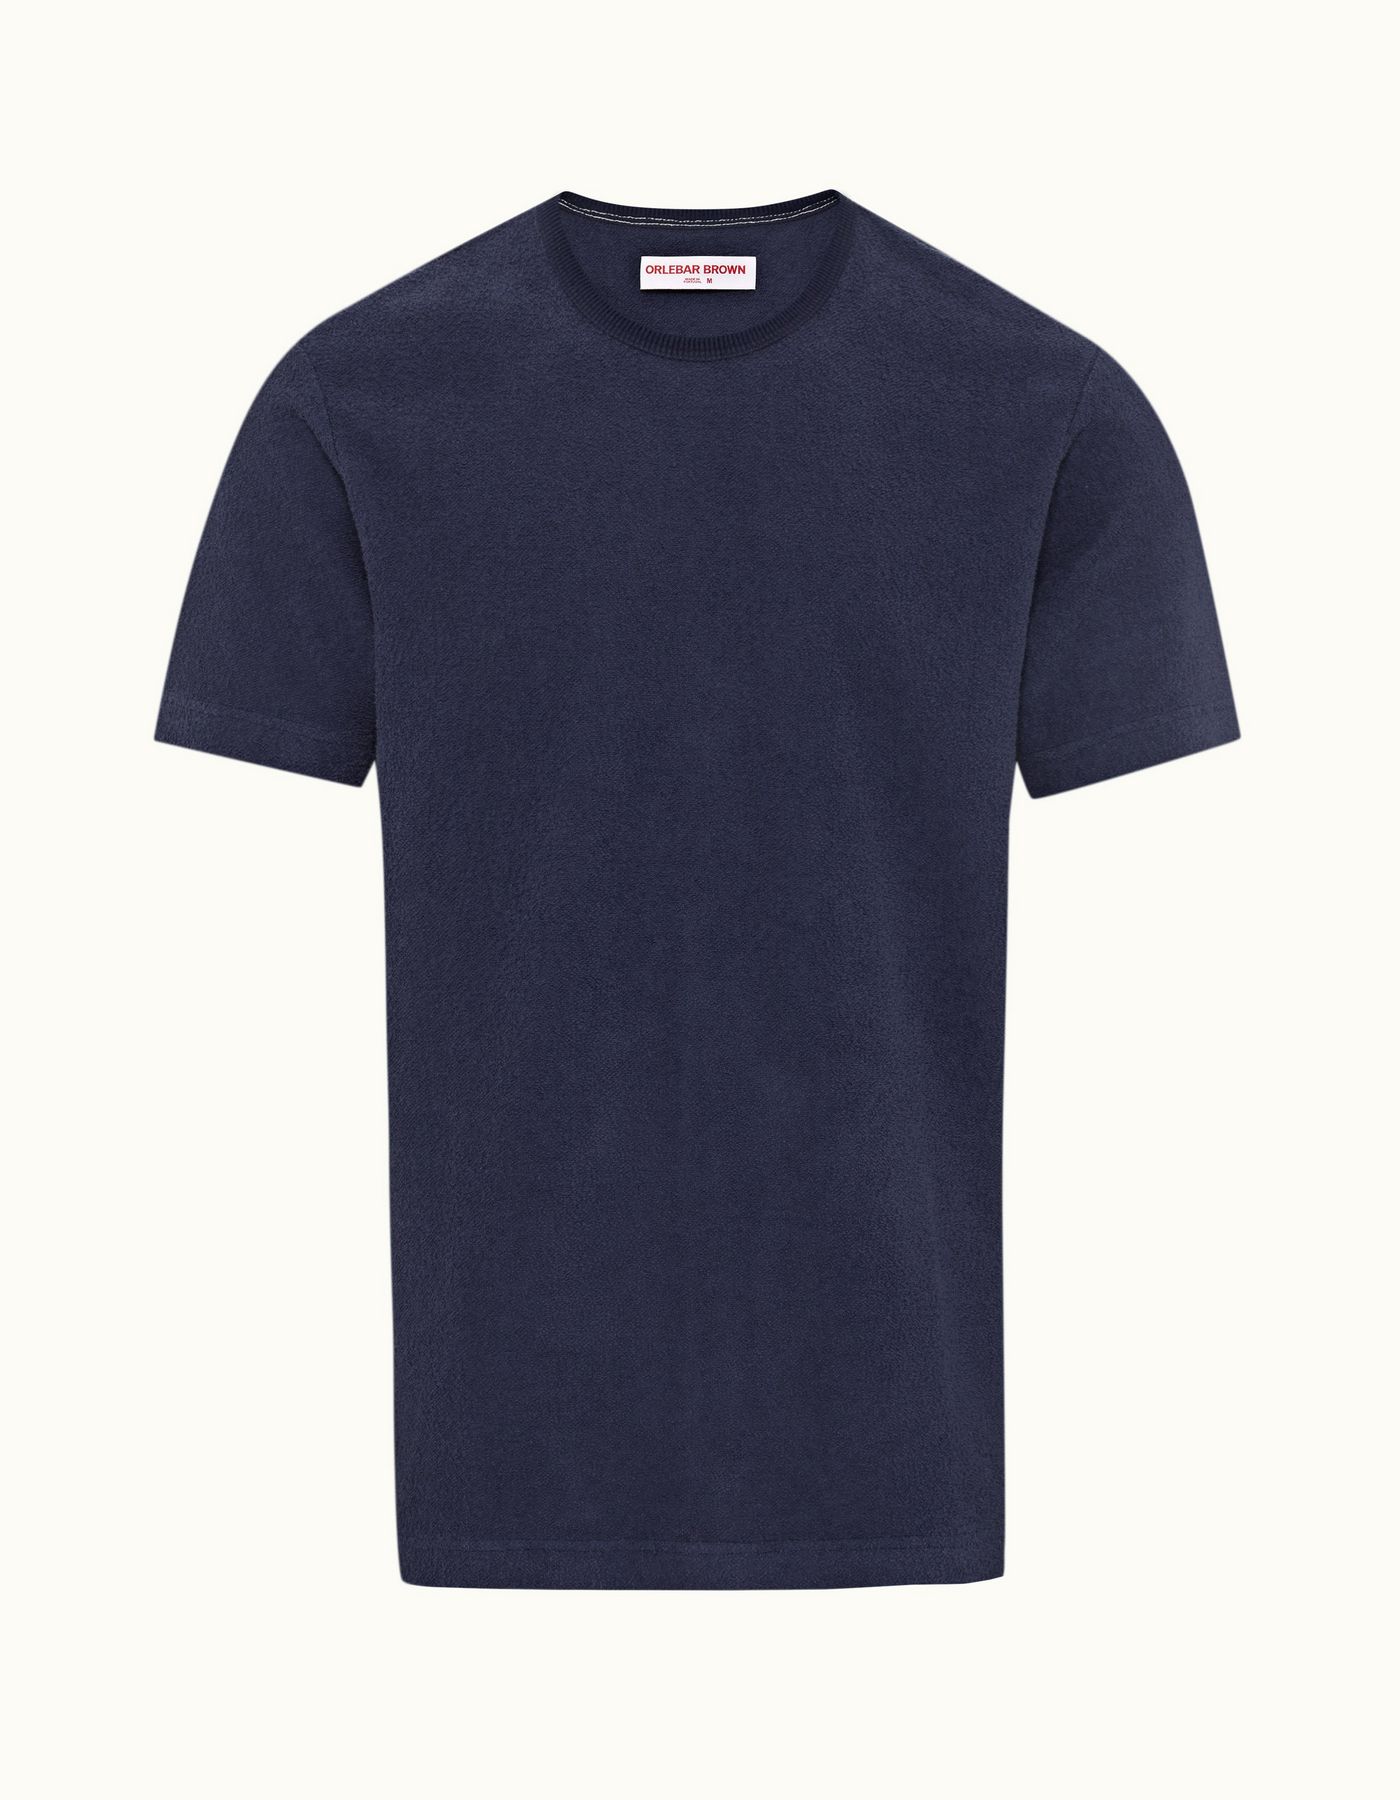 Nicolas Towelling - Mens Lagoon Blue Relaxed Fit Towelling T-shirt